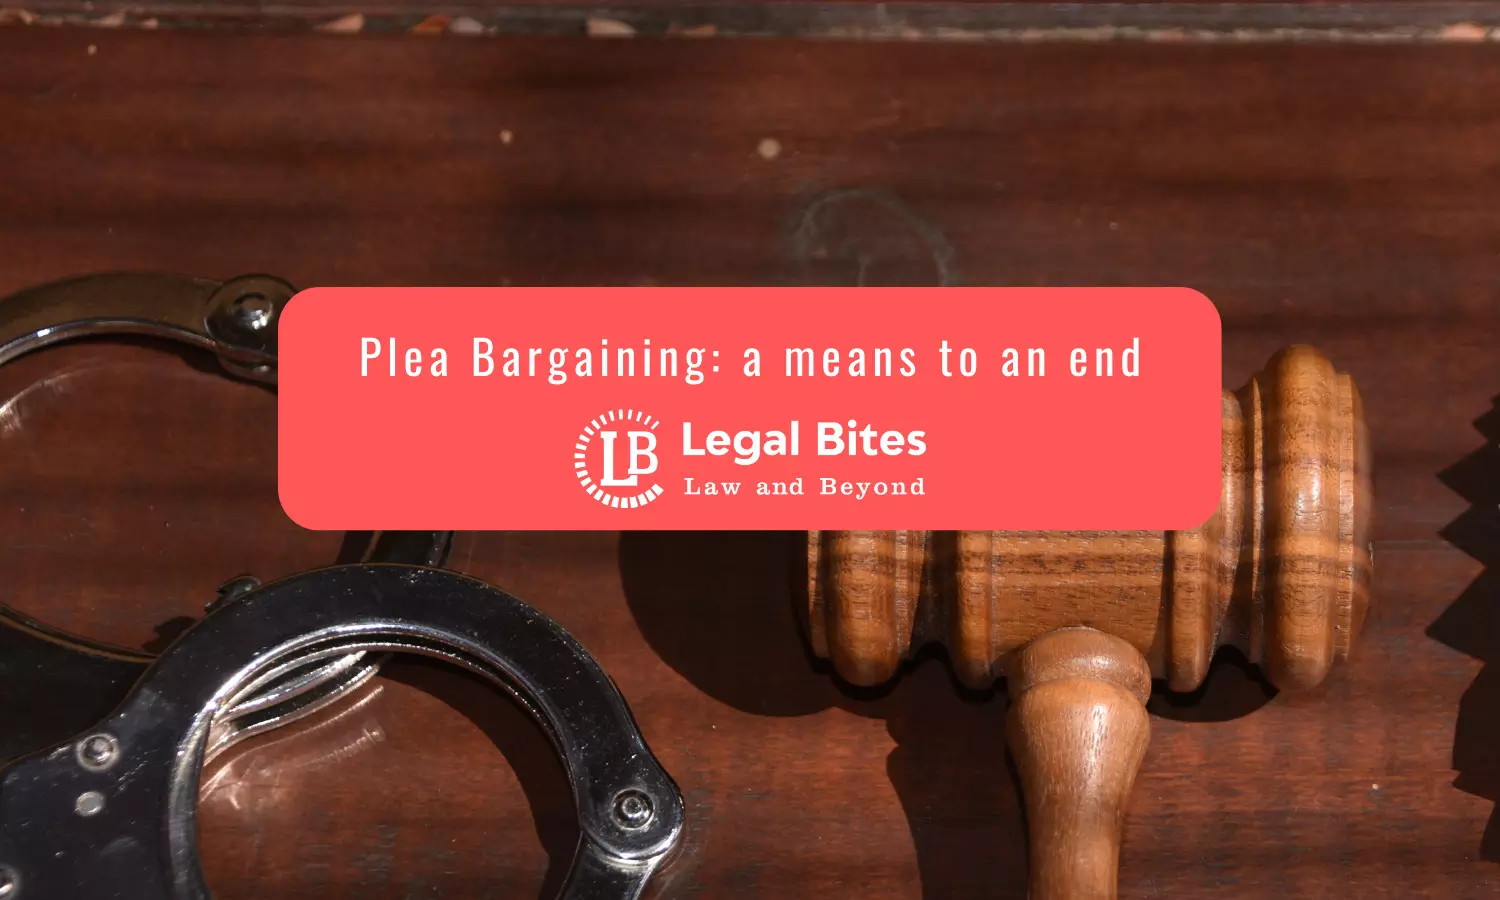 Plea Bargaining: a means to an end